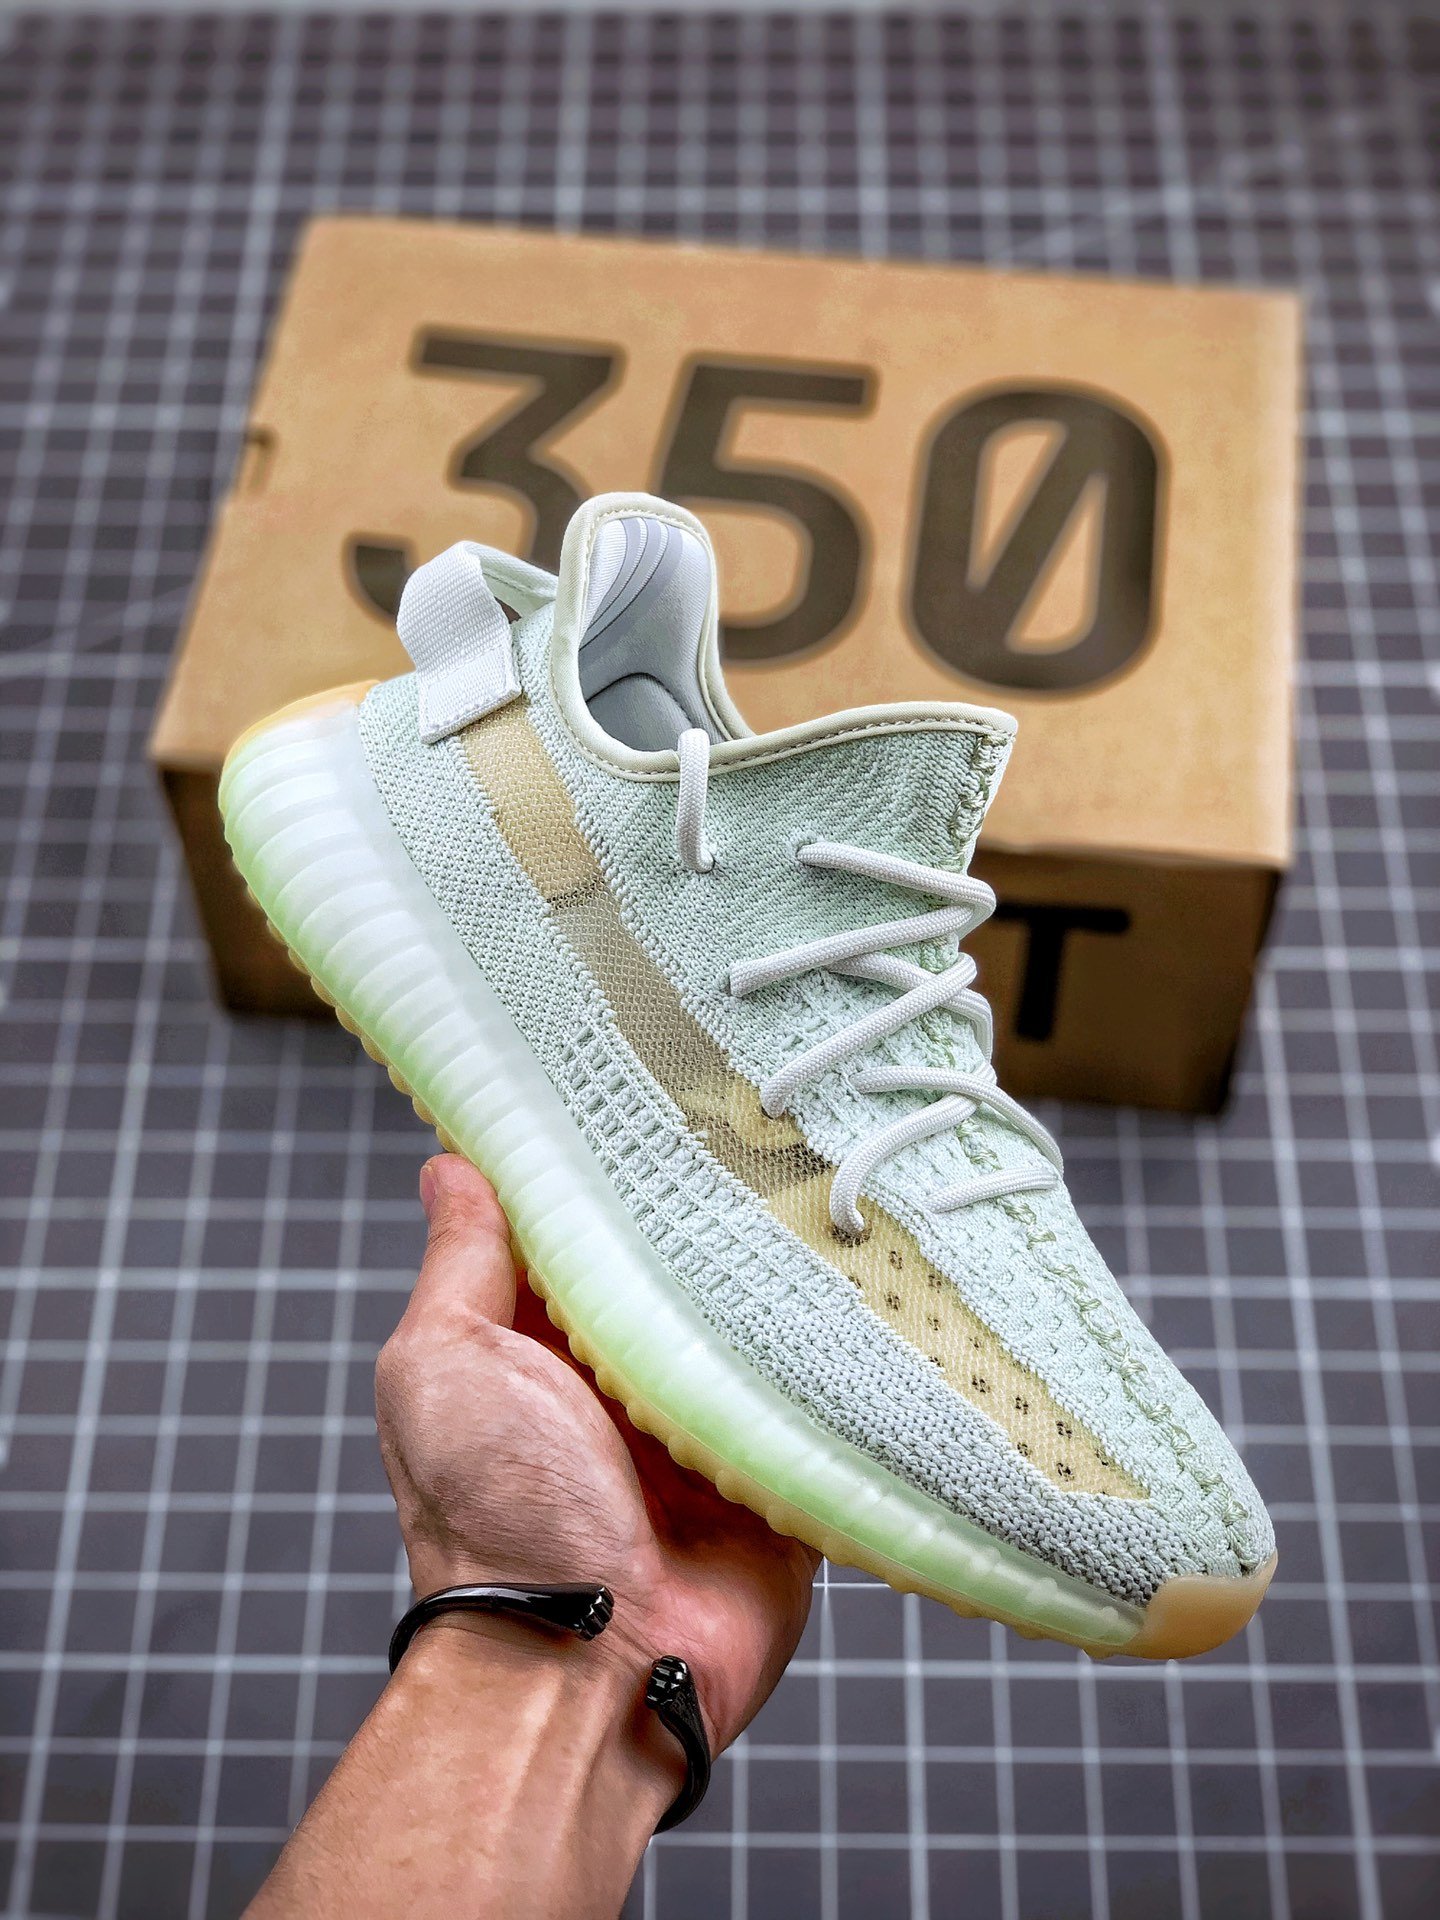 adidas Yeezy Boost 350 v2 “Hyperspace” EG7491 For Sale – Sneaker Hello